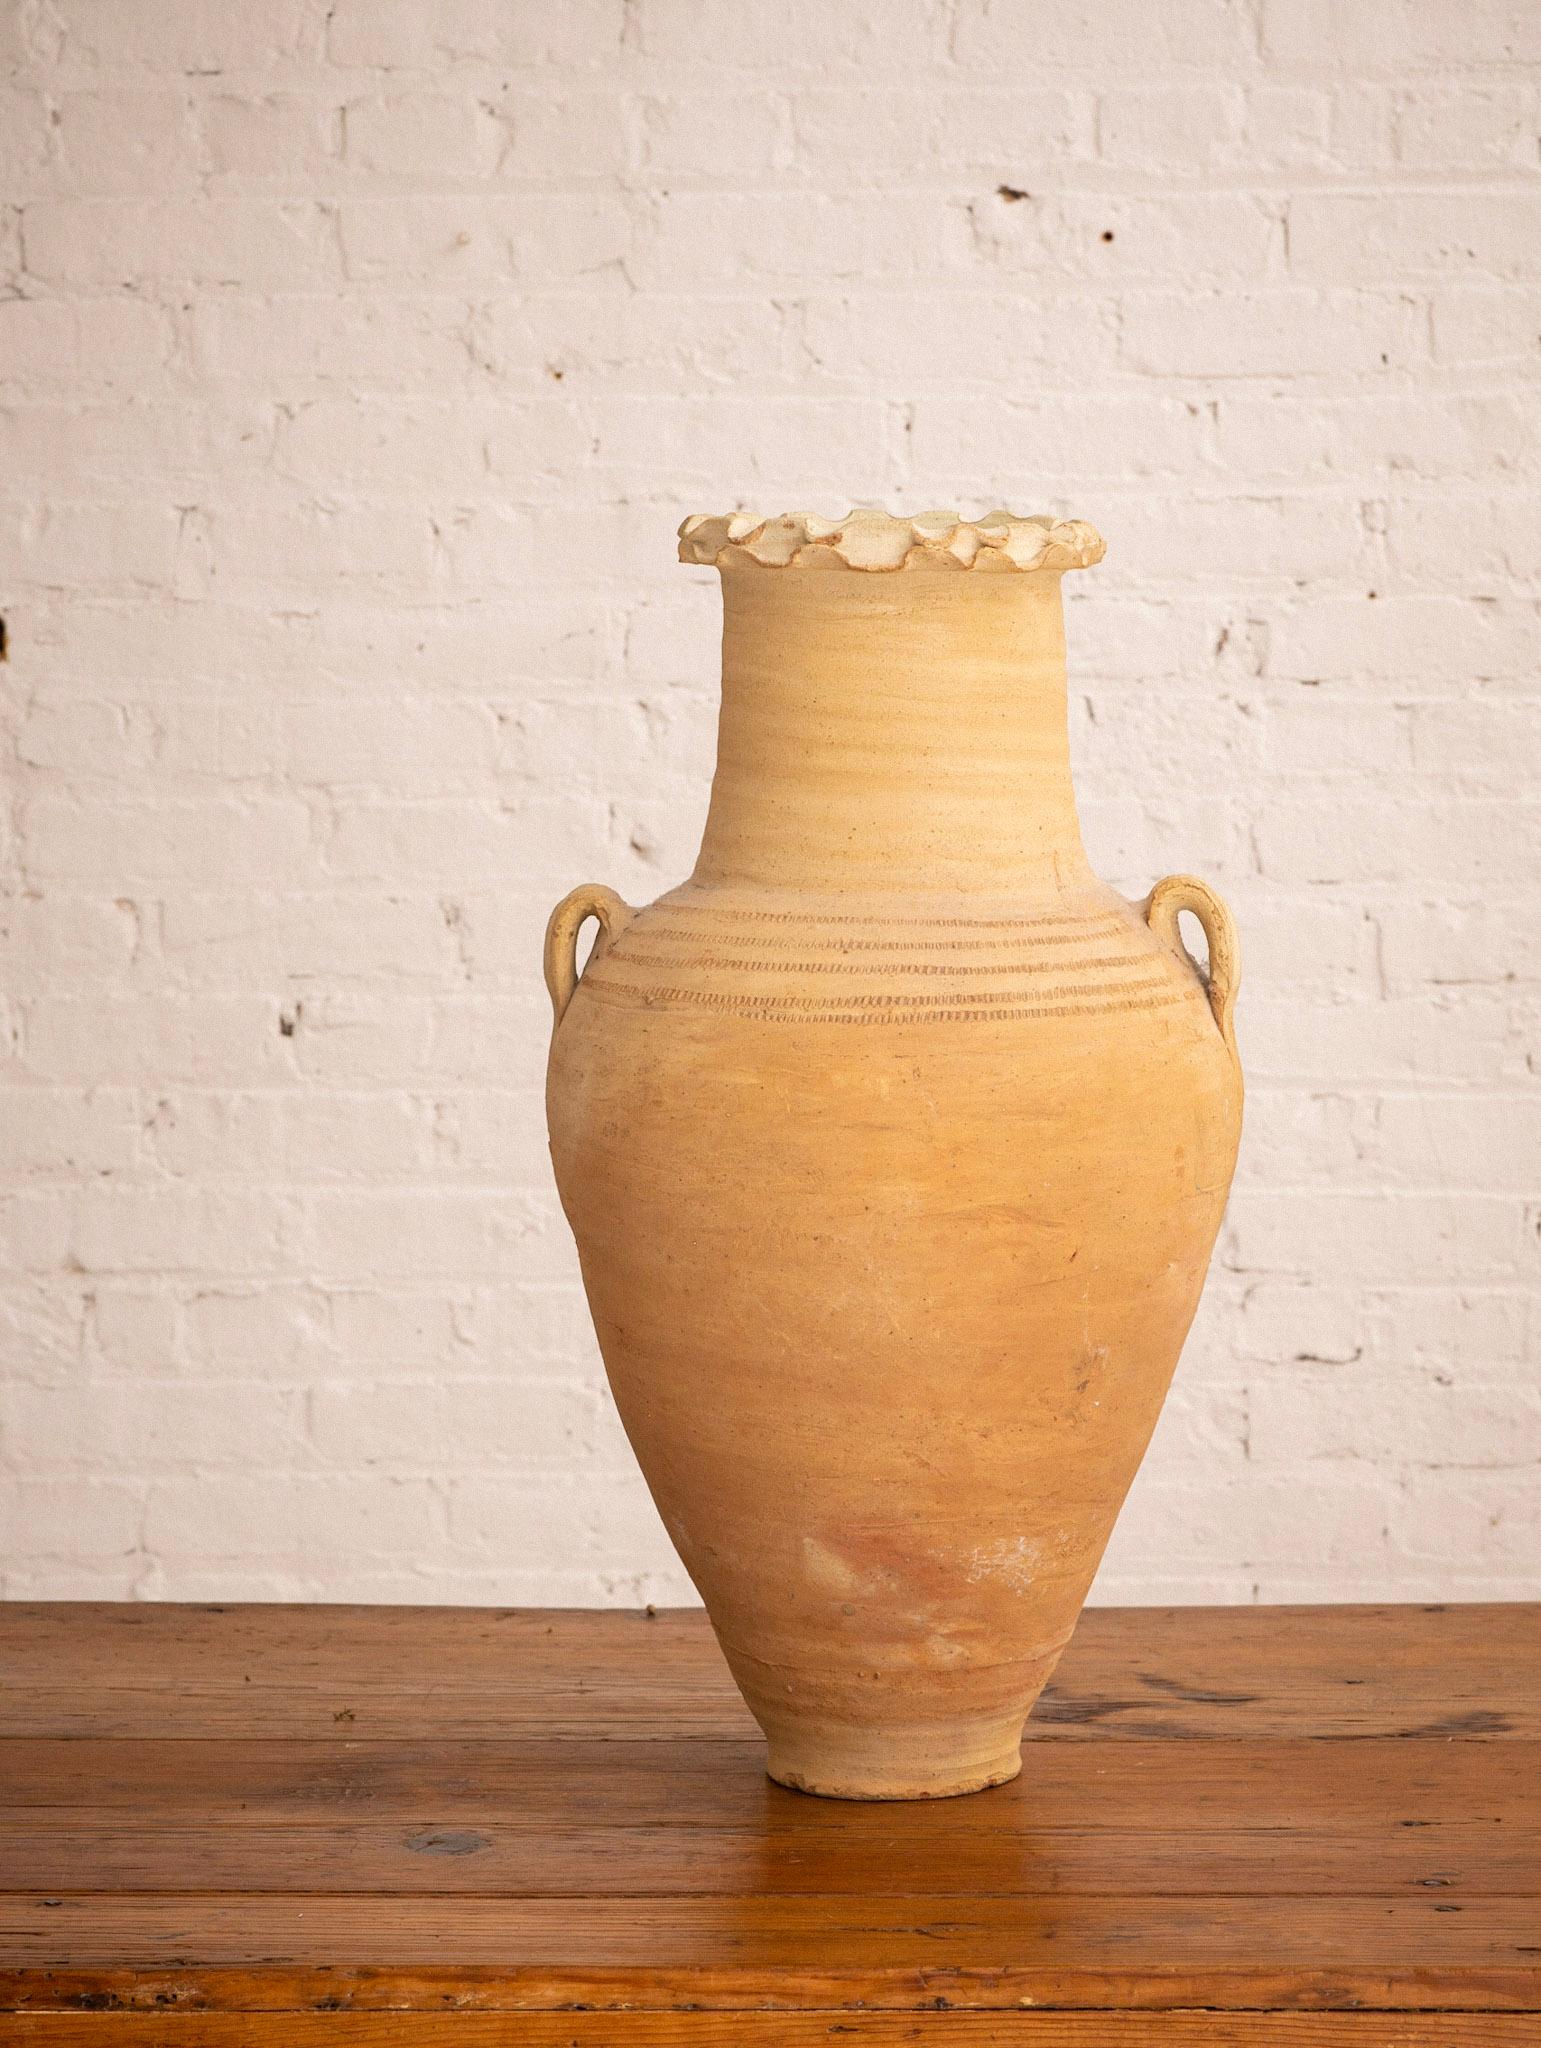 A mid-sized hand thrown terra cotta vessel with natural matte finish. Classic amphora shape with decorative ruffle neck and thatched stripe detail.